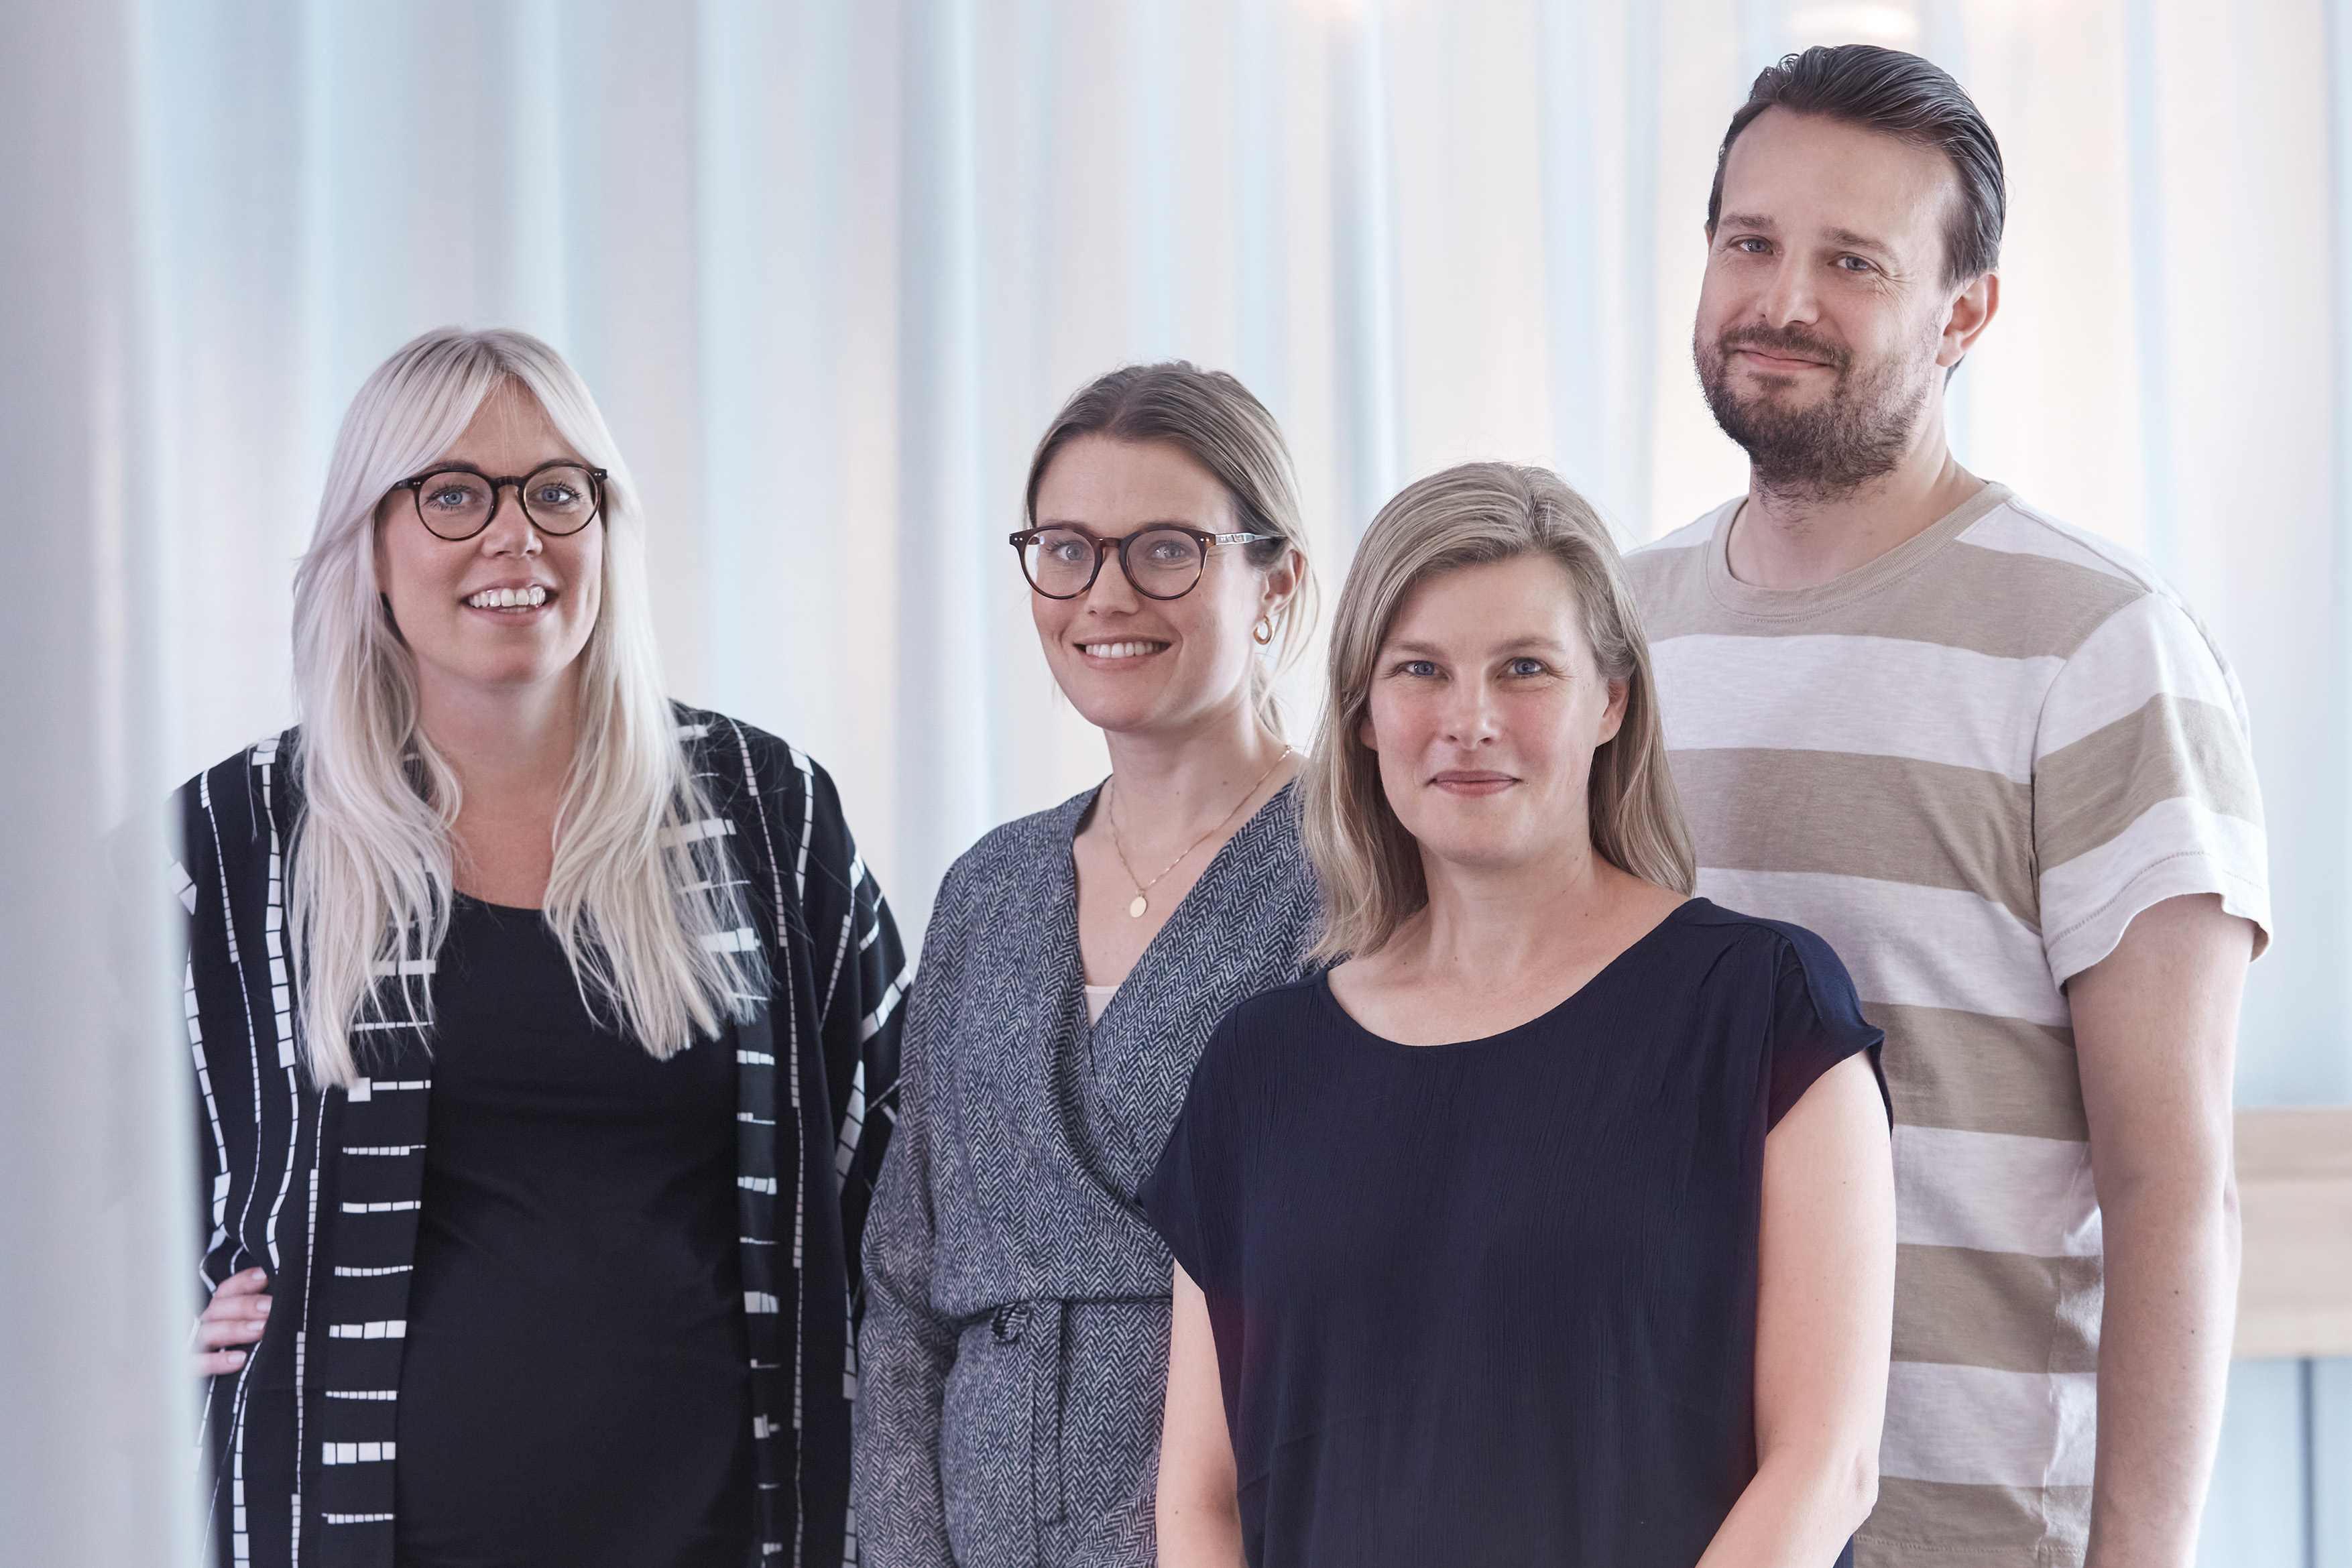 Johanna Augustsson, architect, Pernilla McGillivray, textile designer, Martin Ljungdahl Eriksson, PhD candidate and Victoria Malmberg, PR- and communications specialist talk about the workplace of the future.